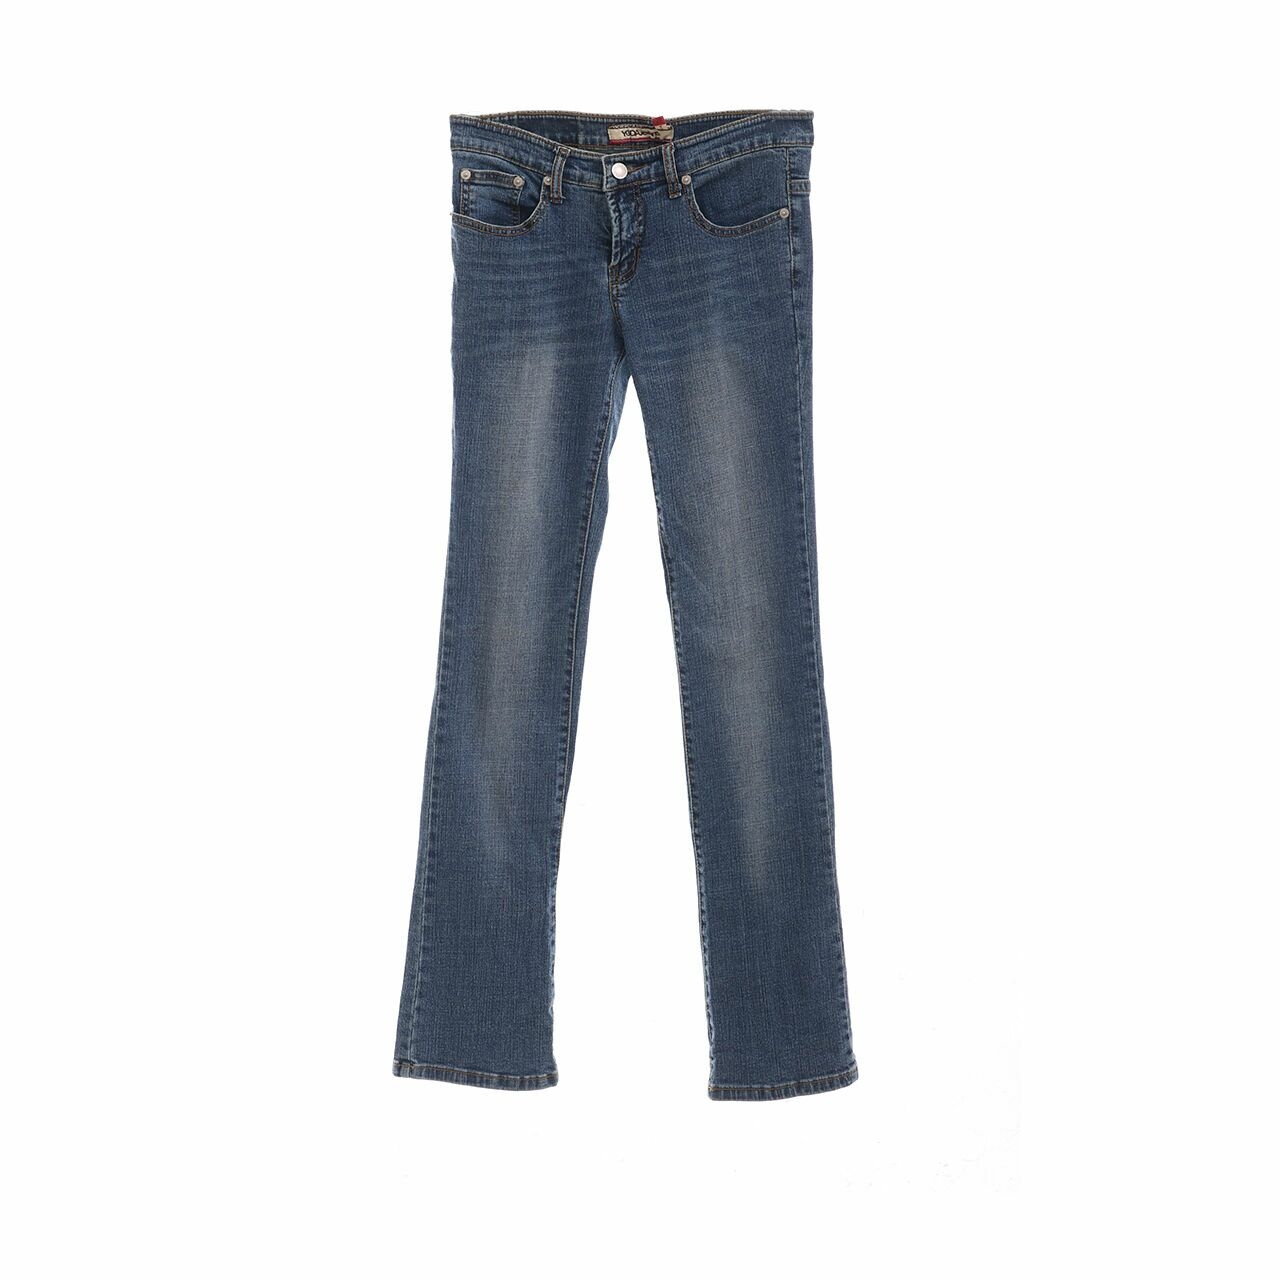 Private Collection Dark Blue Washed Denim Long Pants